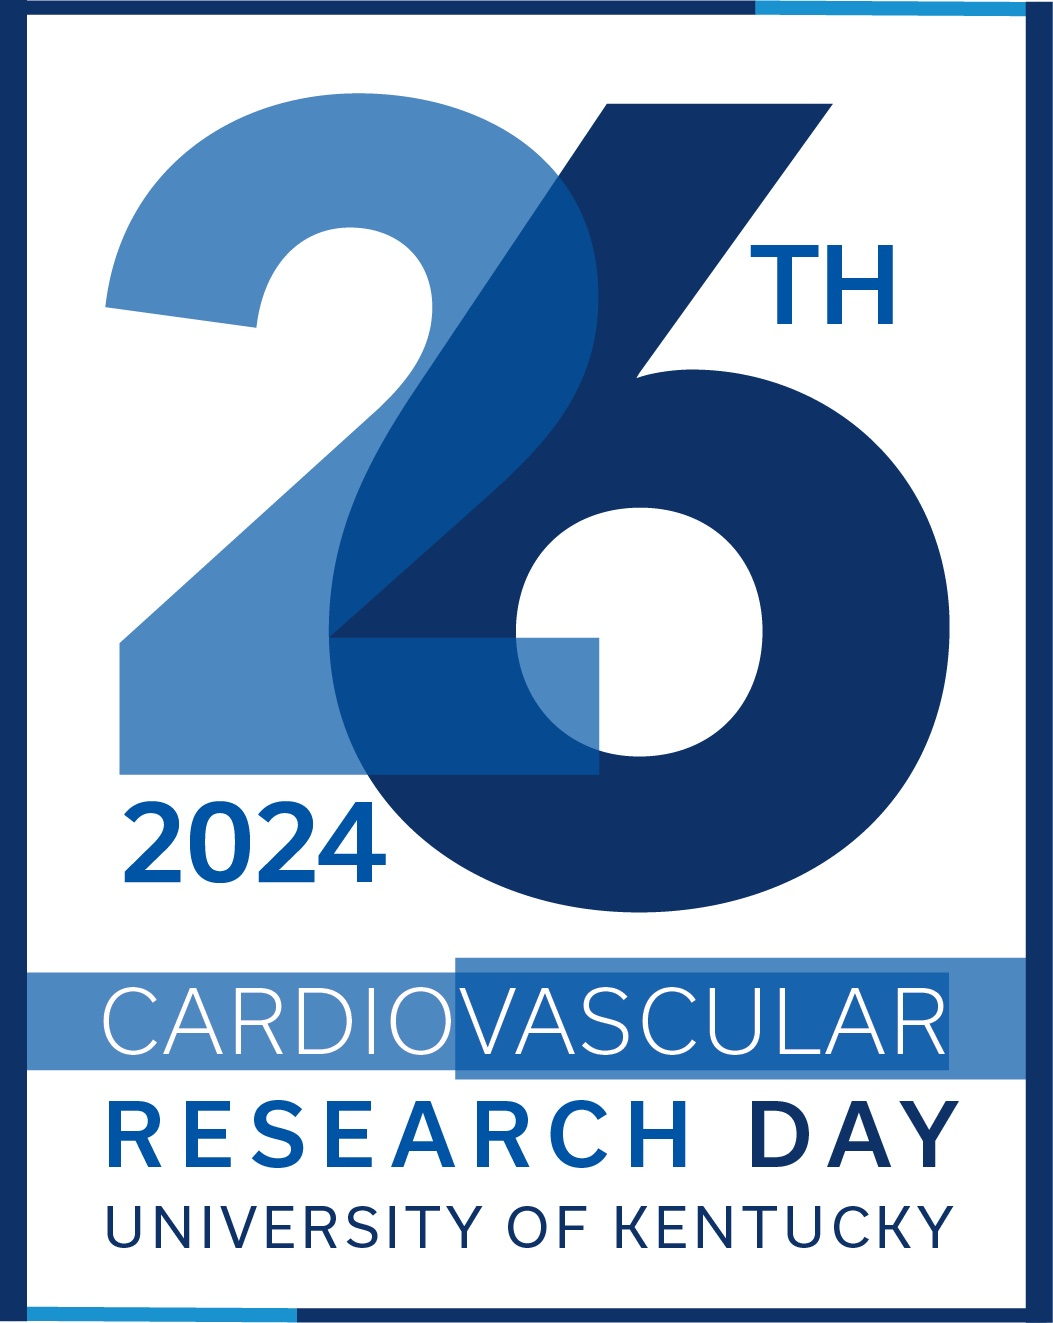 26th Cardiovascular Research Day, 2024. University of Kentucky.